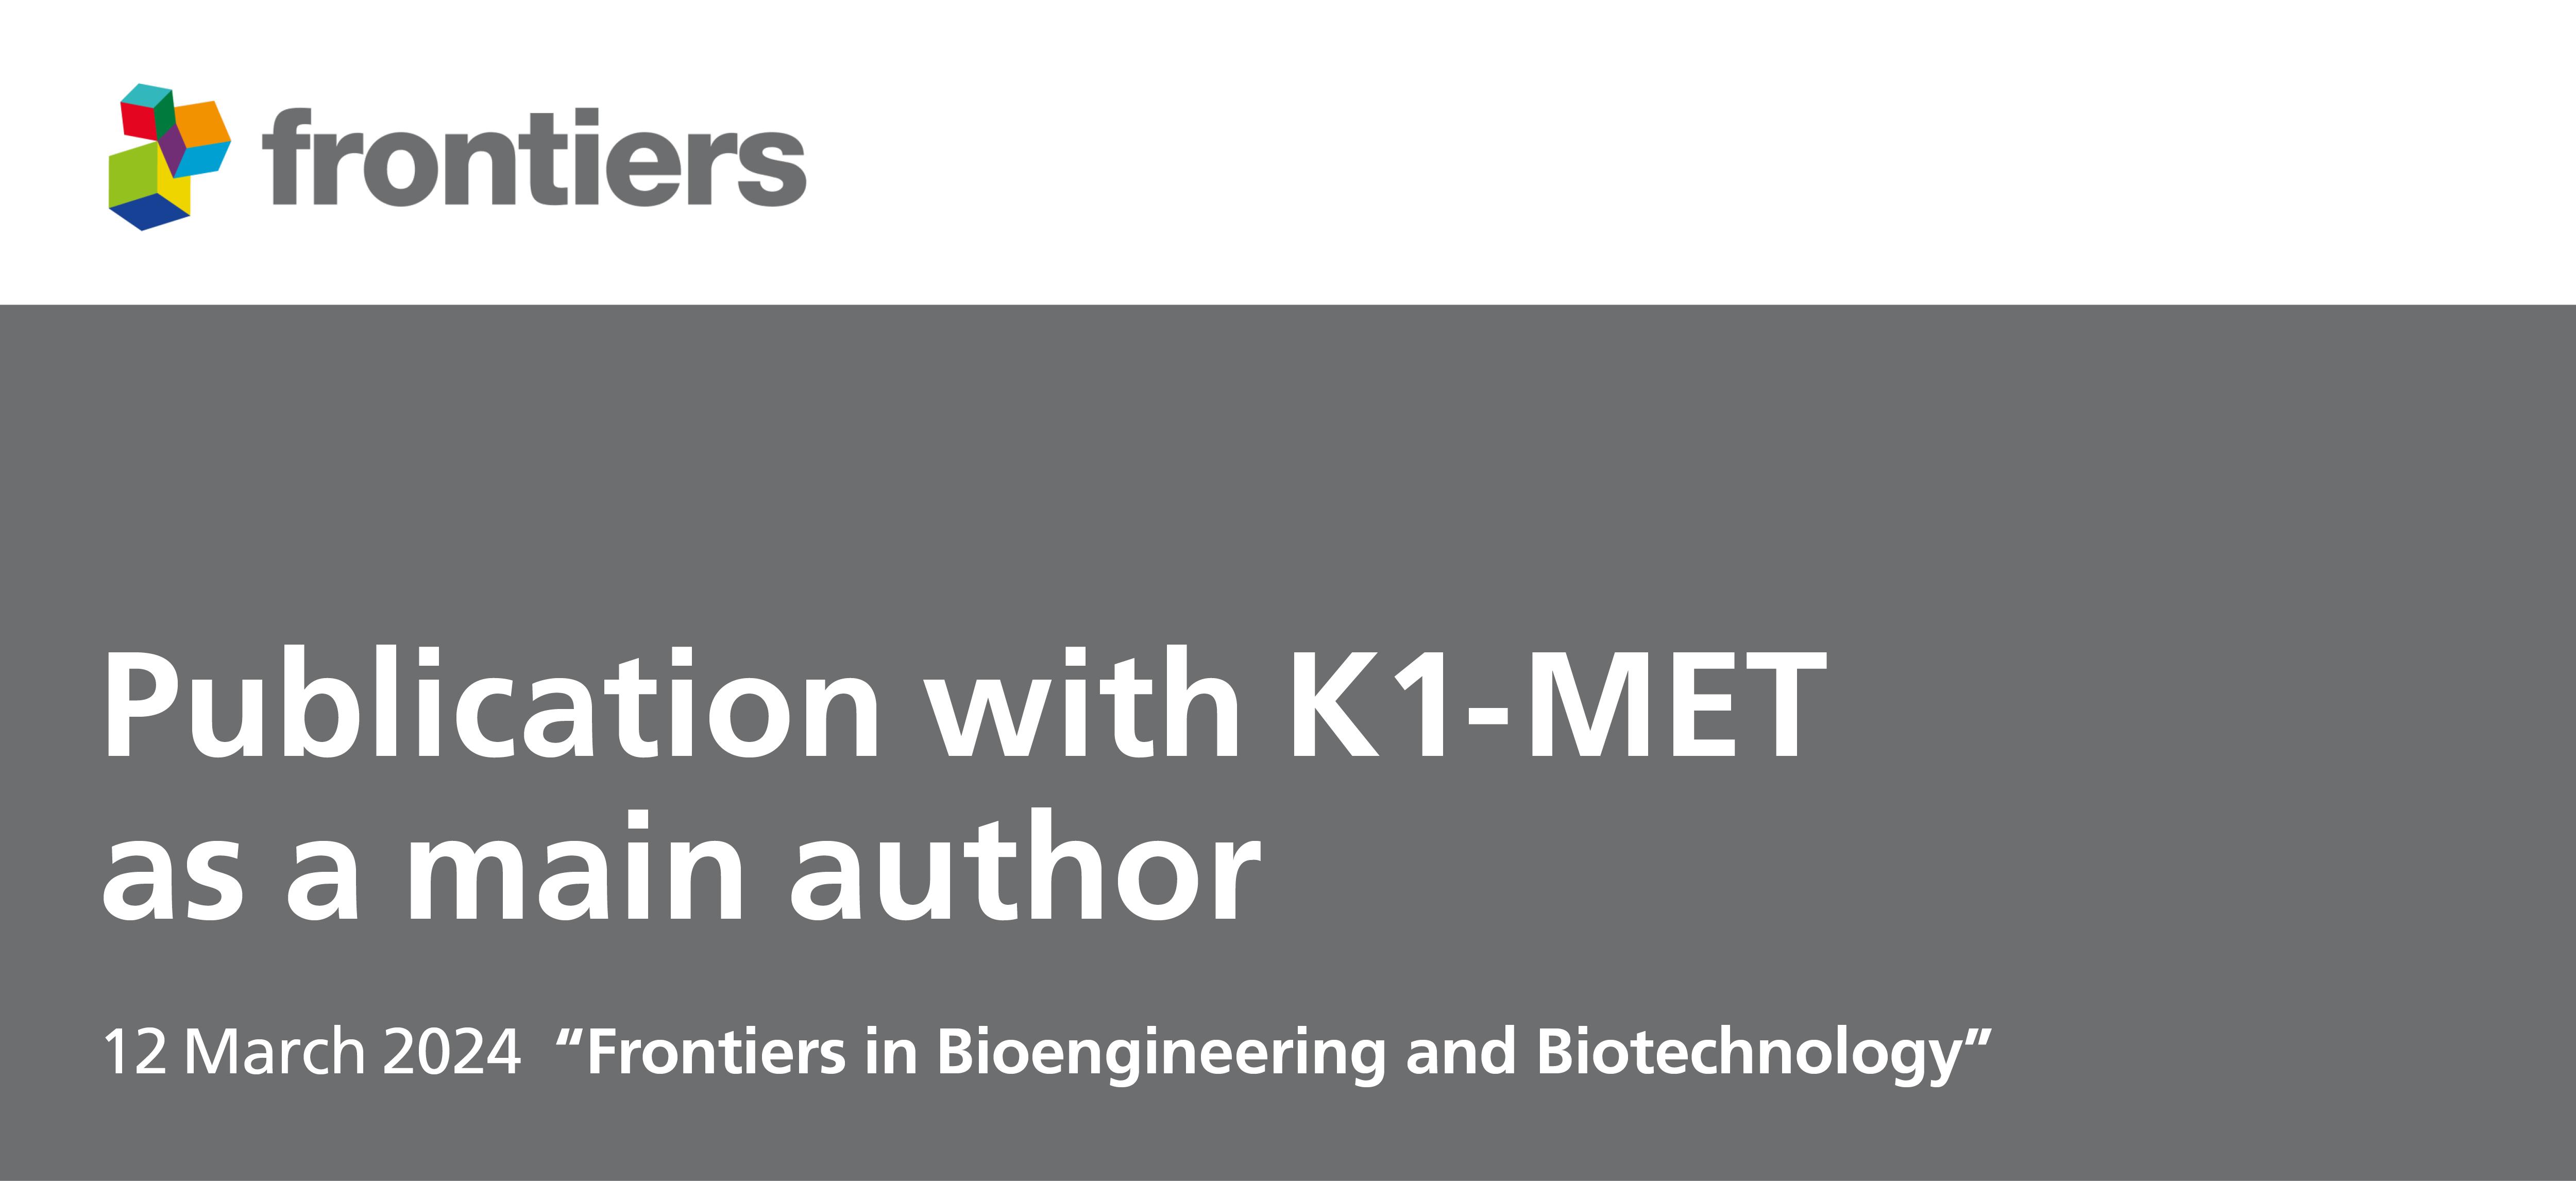 Publication with K1-MET as a main author, 12 March 2024 “Frontiers in Bioengineering and Biotechnology”